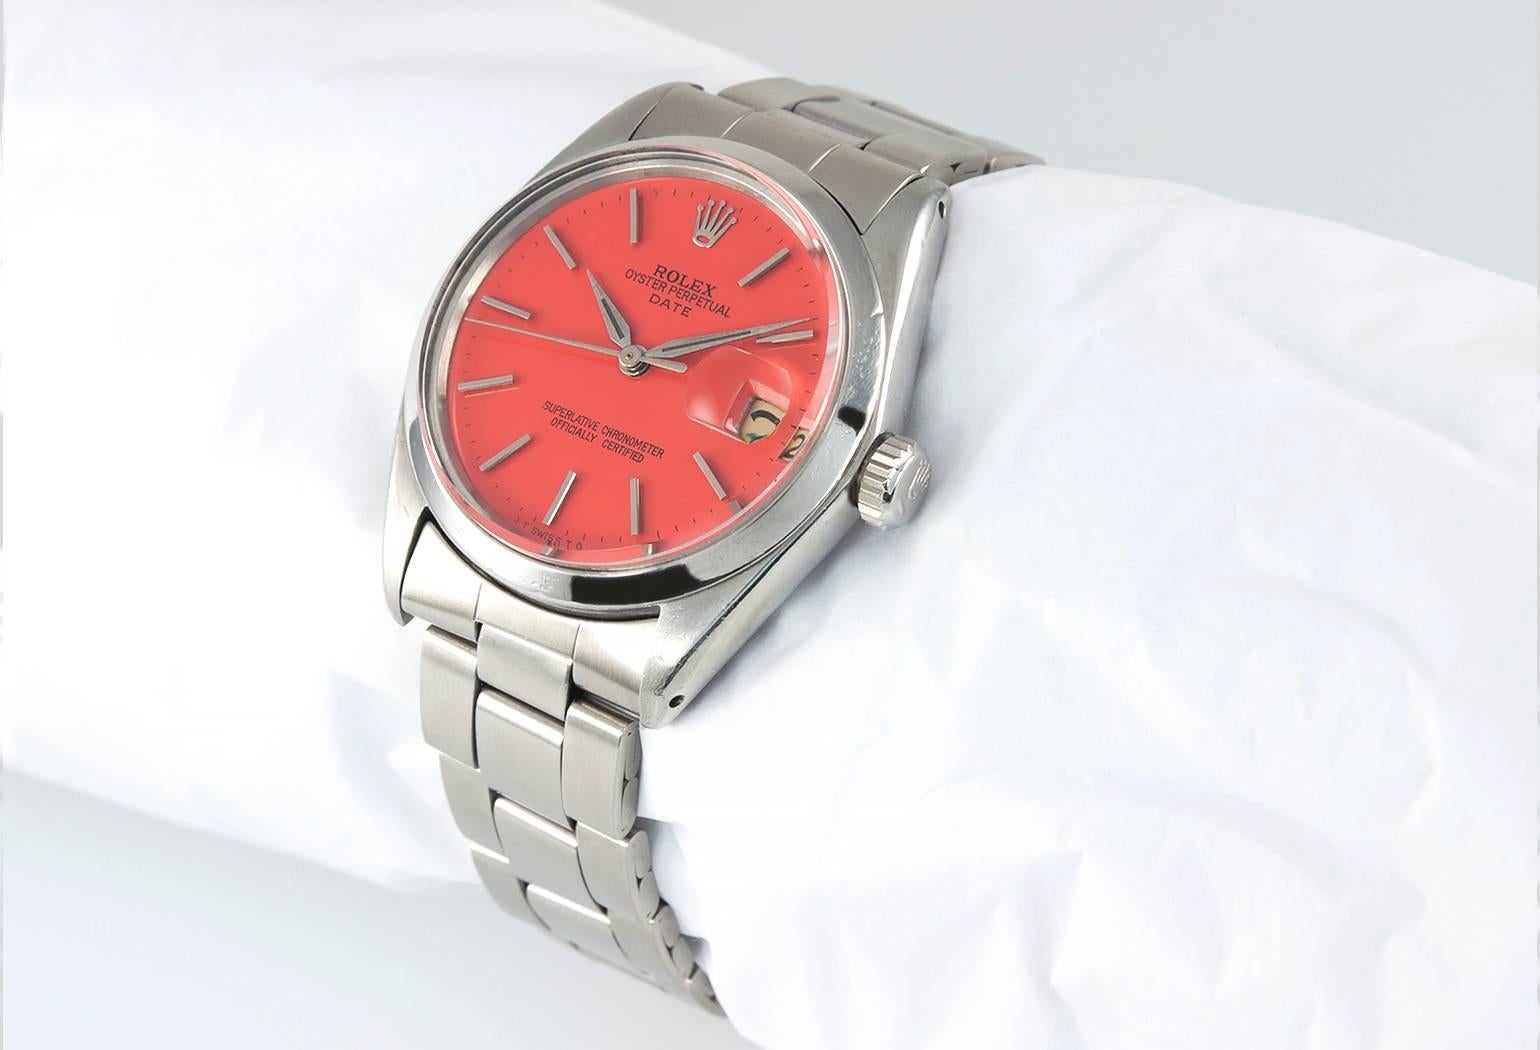 Rolex Date wristwatch in stainless steel reference 1500. This classic Rolex watch features a custom colored red coral dial, a stainless steel smooth bezel, a waterproof stainless steel crown, oyster riveted steel bracelet, plastic crystal, automatic